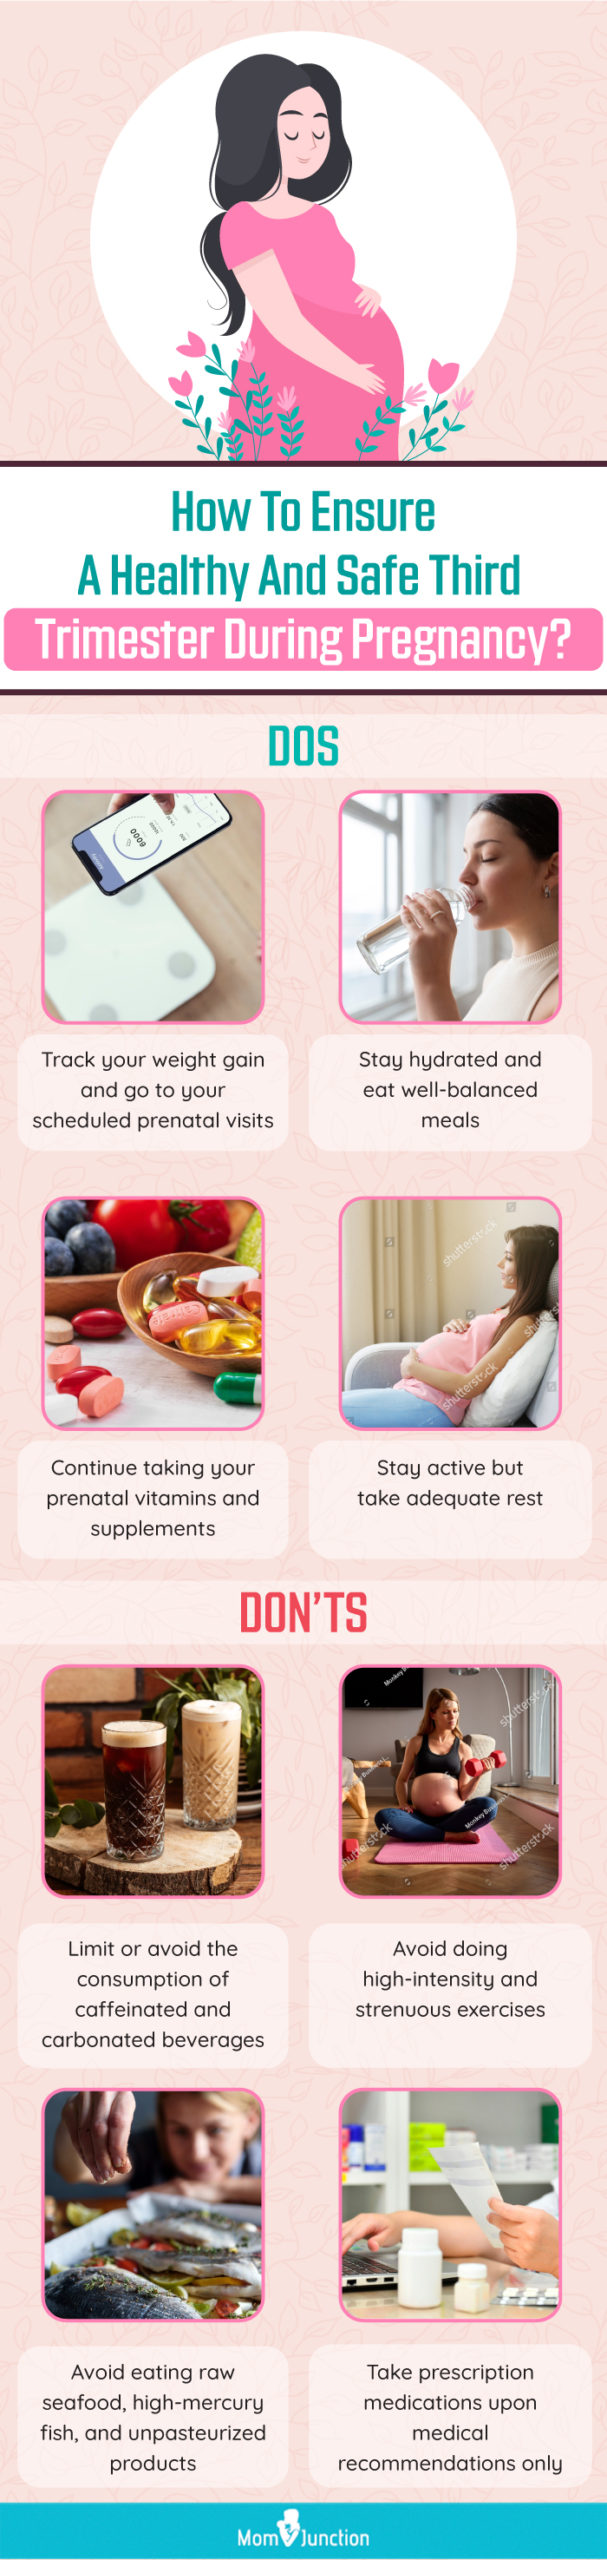 how to ensure a healthy and safe third trimester during pregnancy (infographic)